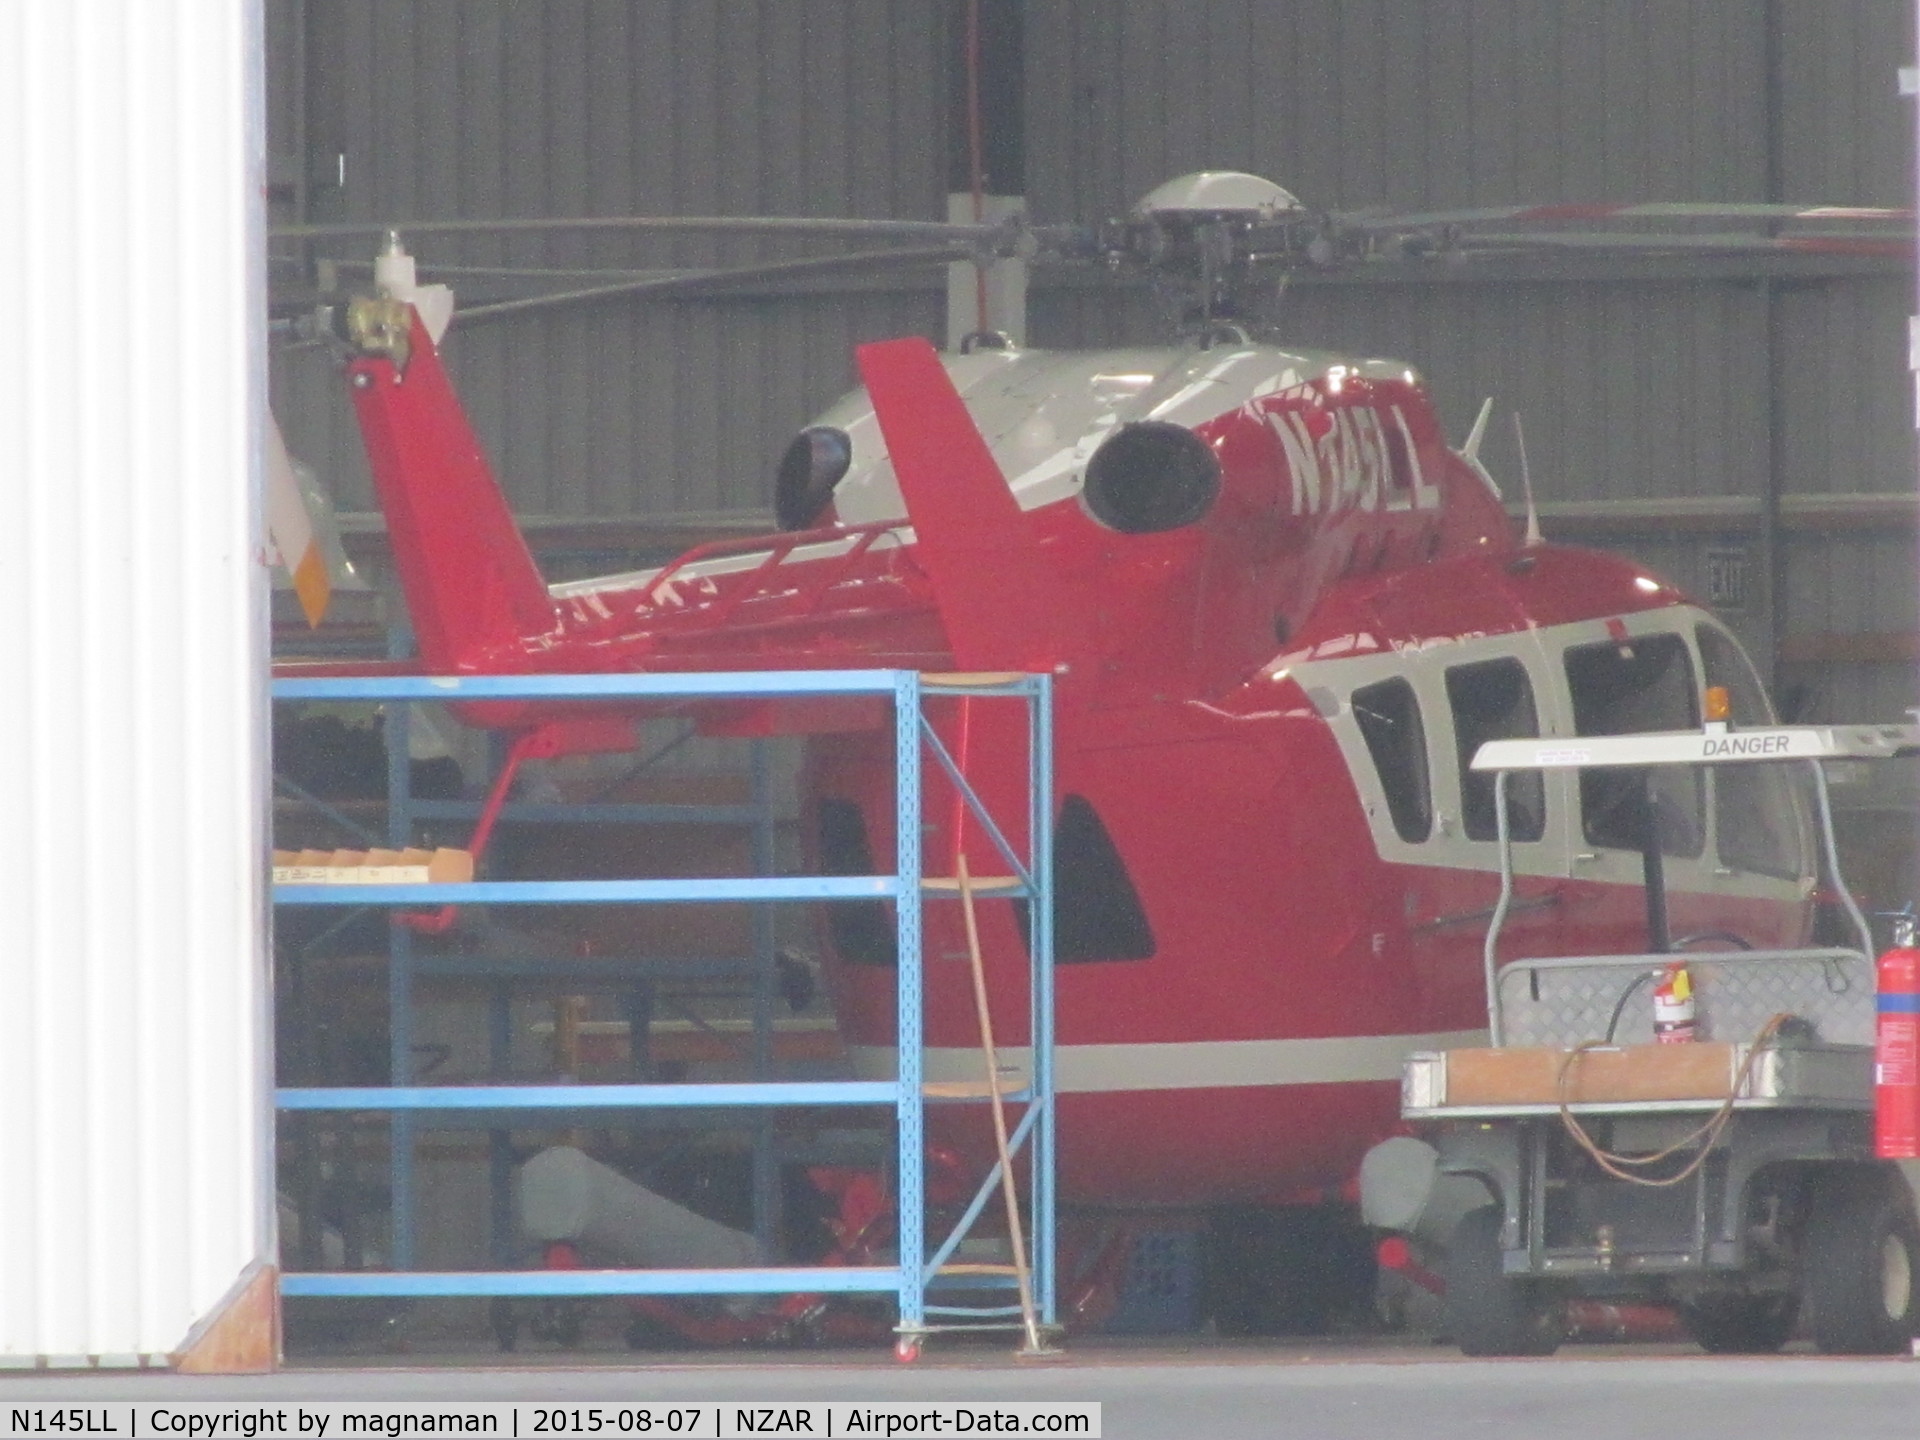 N145LL, Eurocopter-Kawasaki EC-145 (BK-117C-2) C/N 9574, Hiding inside airbus hangar - yet another super yacht rotorcraft visitor to Auckland.